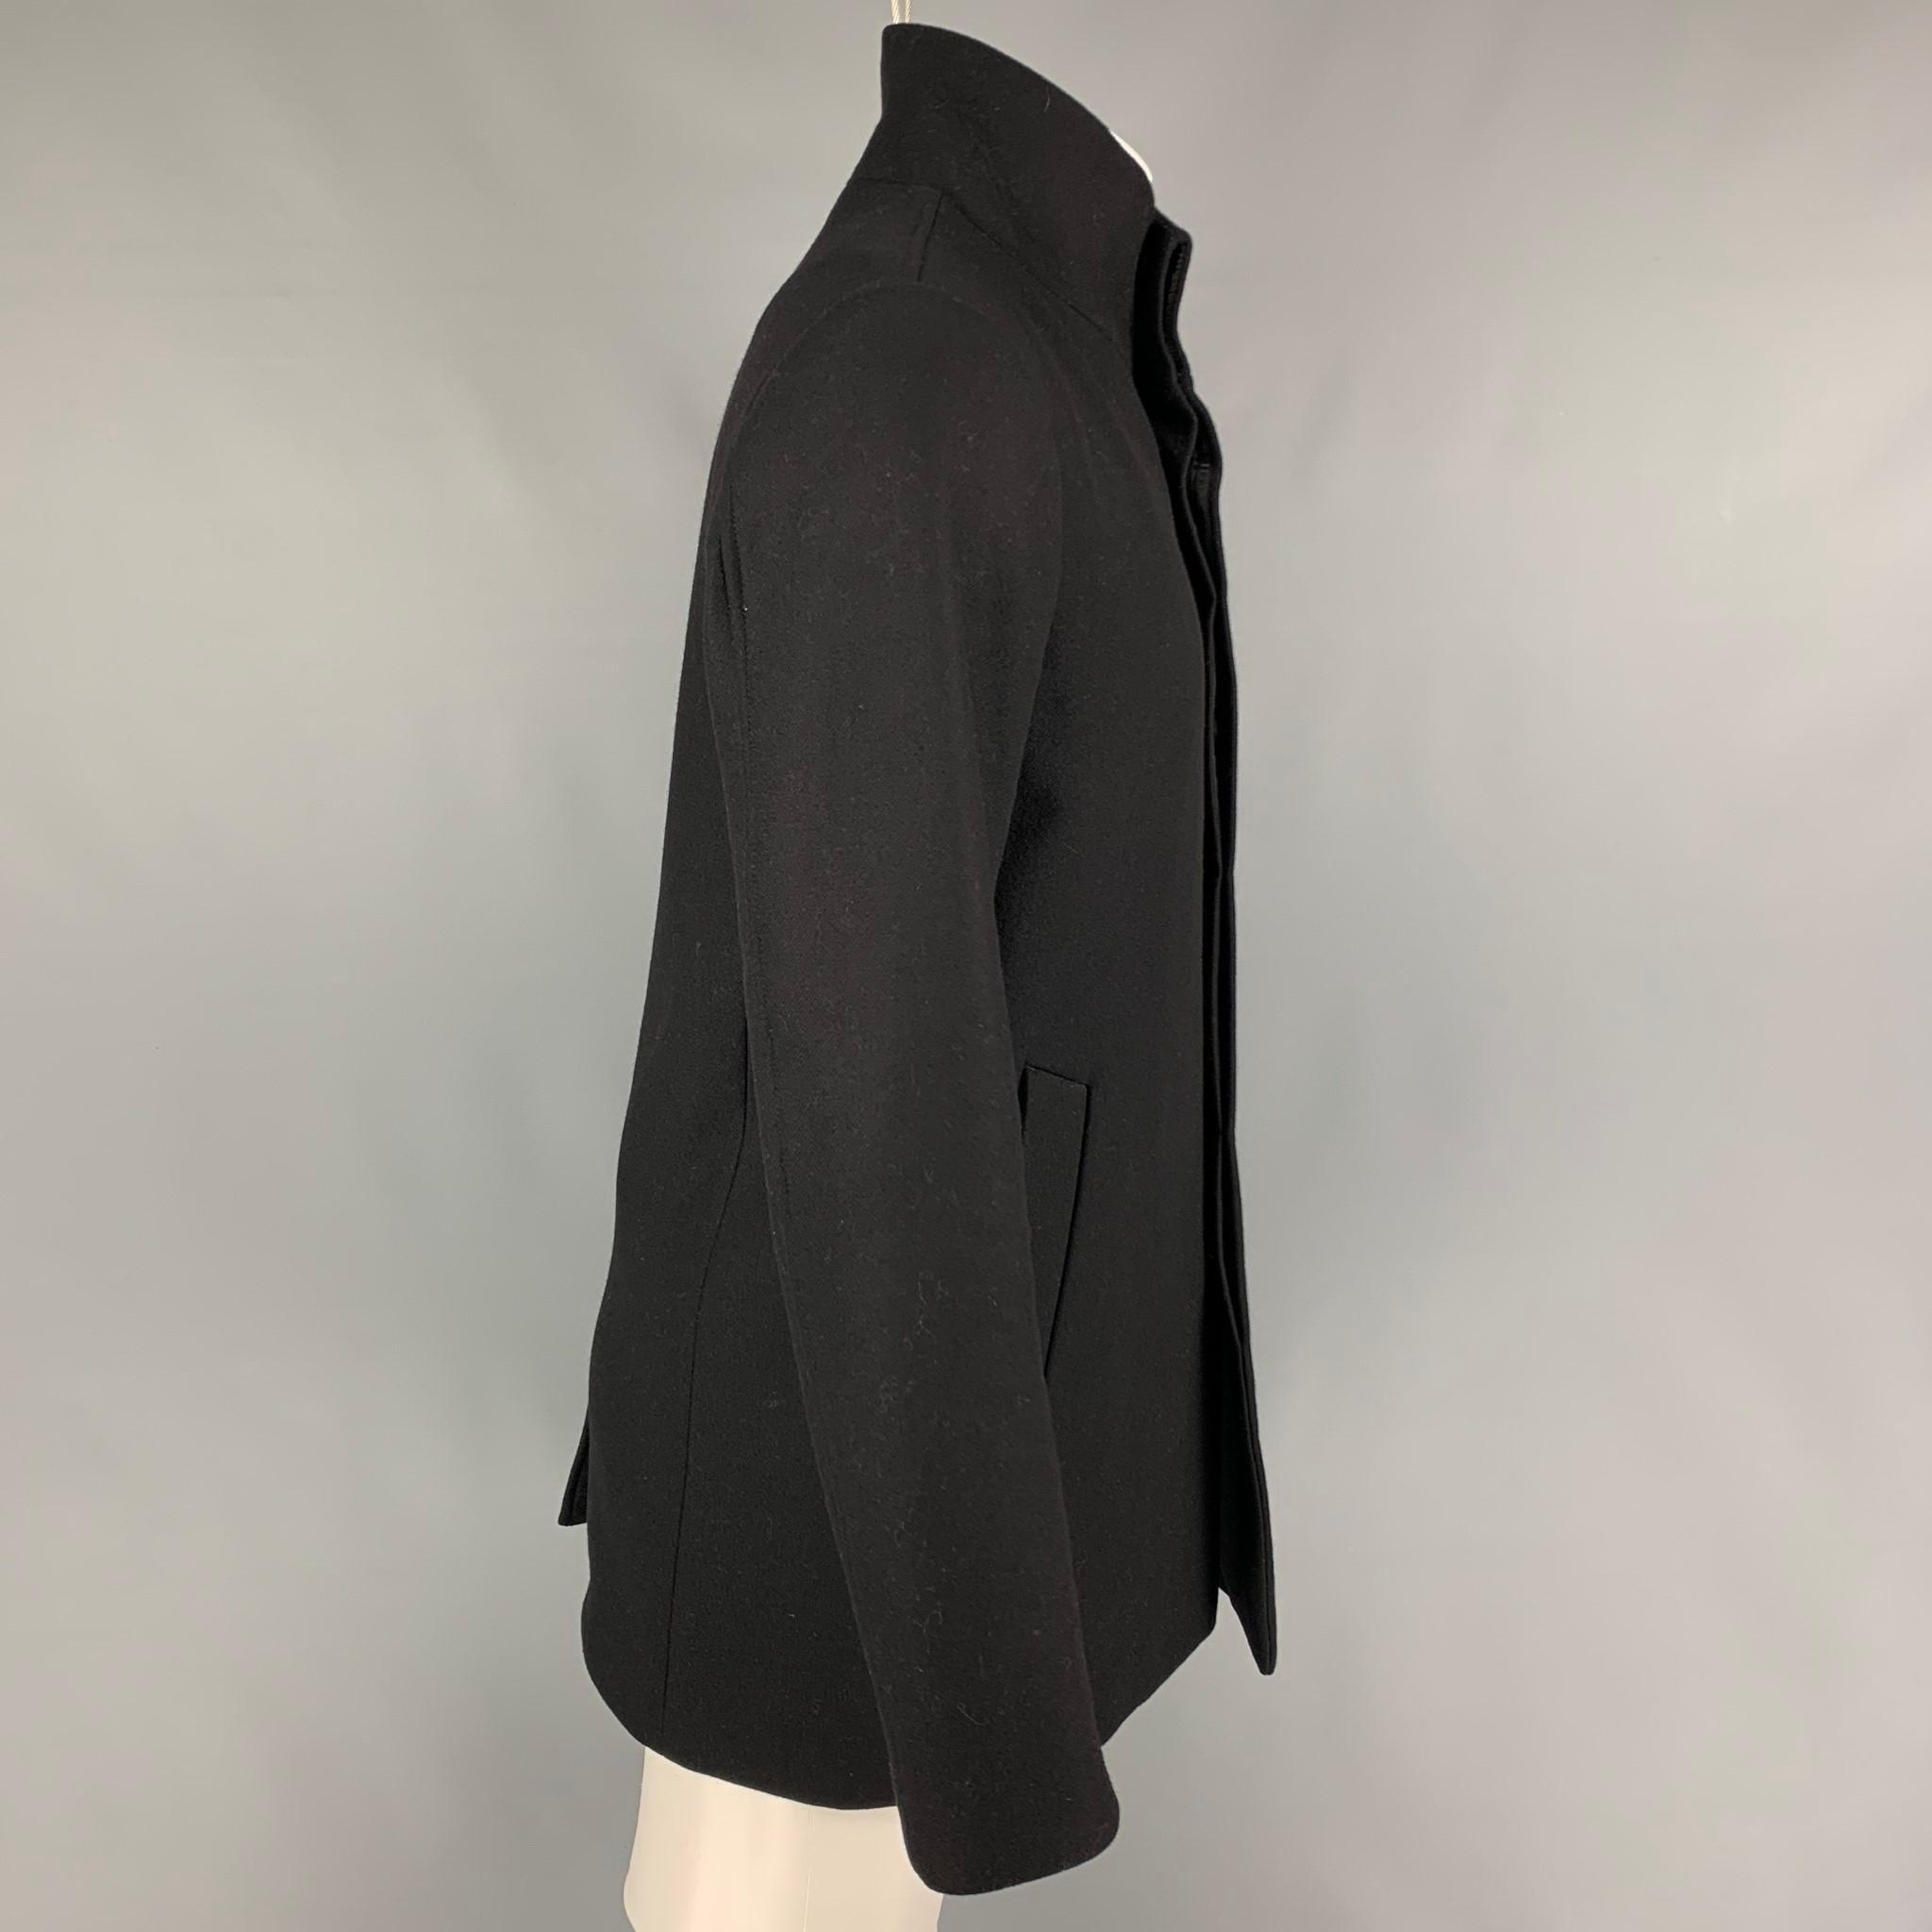 THEORY coat comes in a black wool  featuring a high collar, slit pockets, single back vent, and a hidden placket closure.

Very Good Pre-Owned Condition.
Marked: M

Measurements:

Shoulder: 18 in.
Chest: 43 in.
Sleeve: 26 in.
Length: 31 in. 